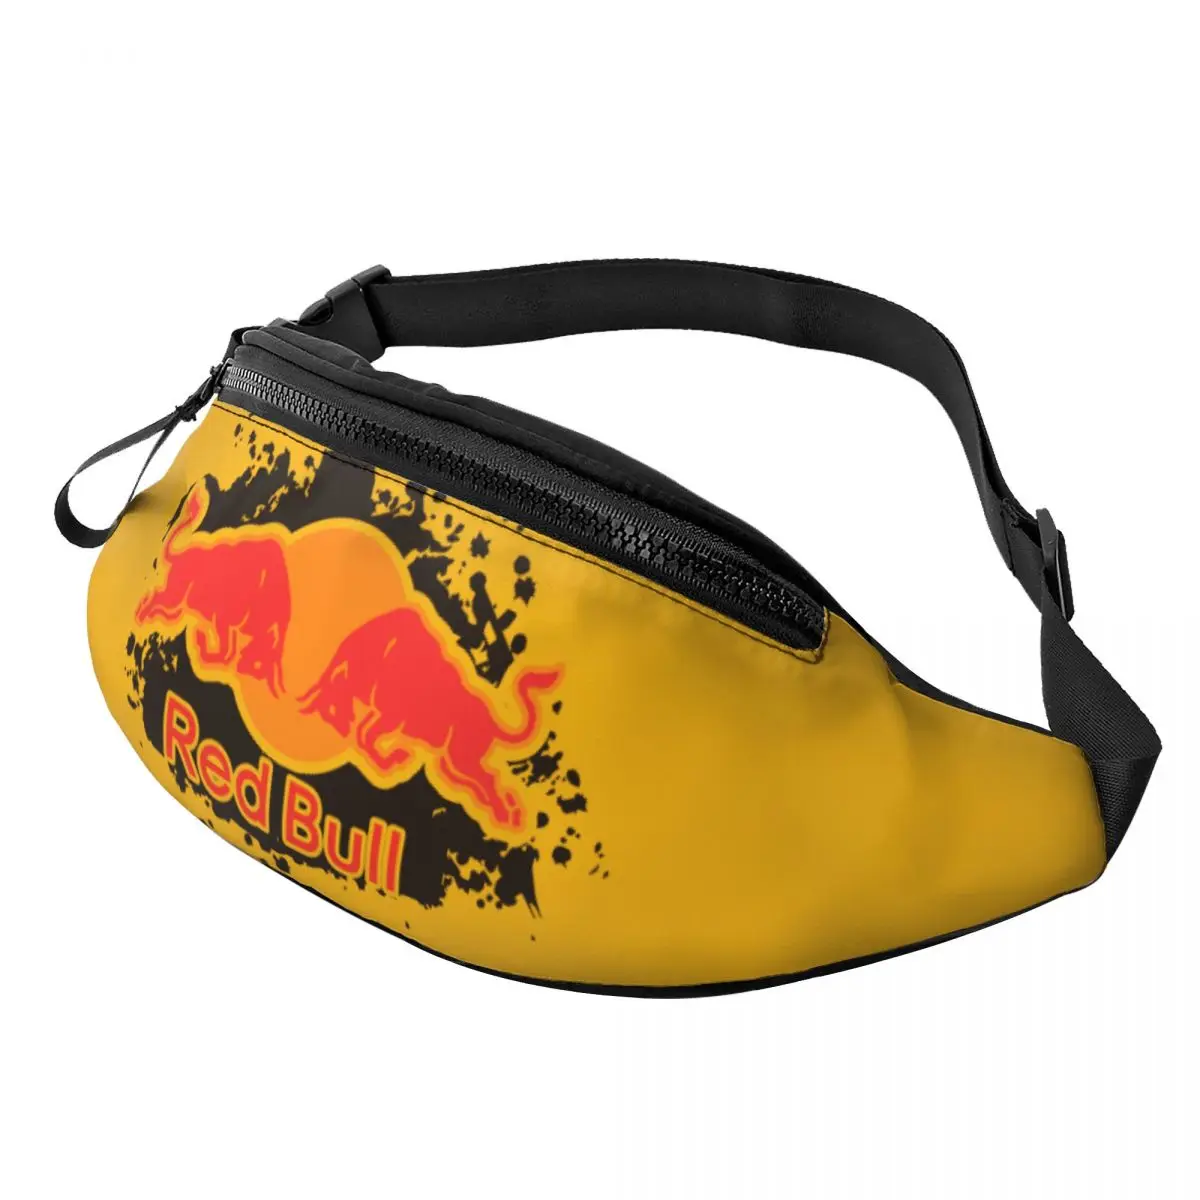 

Fashion Red Double-Bull Fanny Pack Men Women Crossbody Waist Bag for Traveling Phone Money Pouch